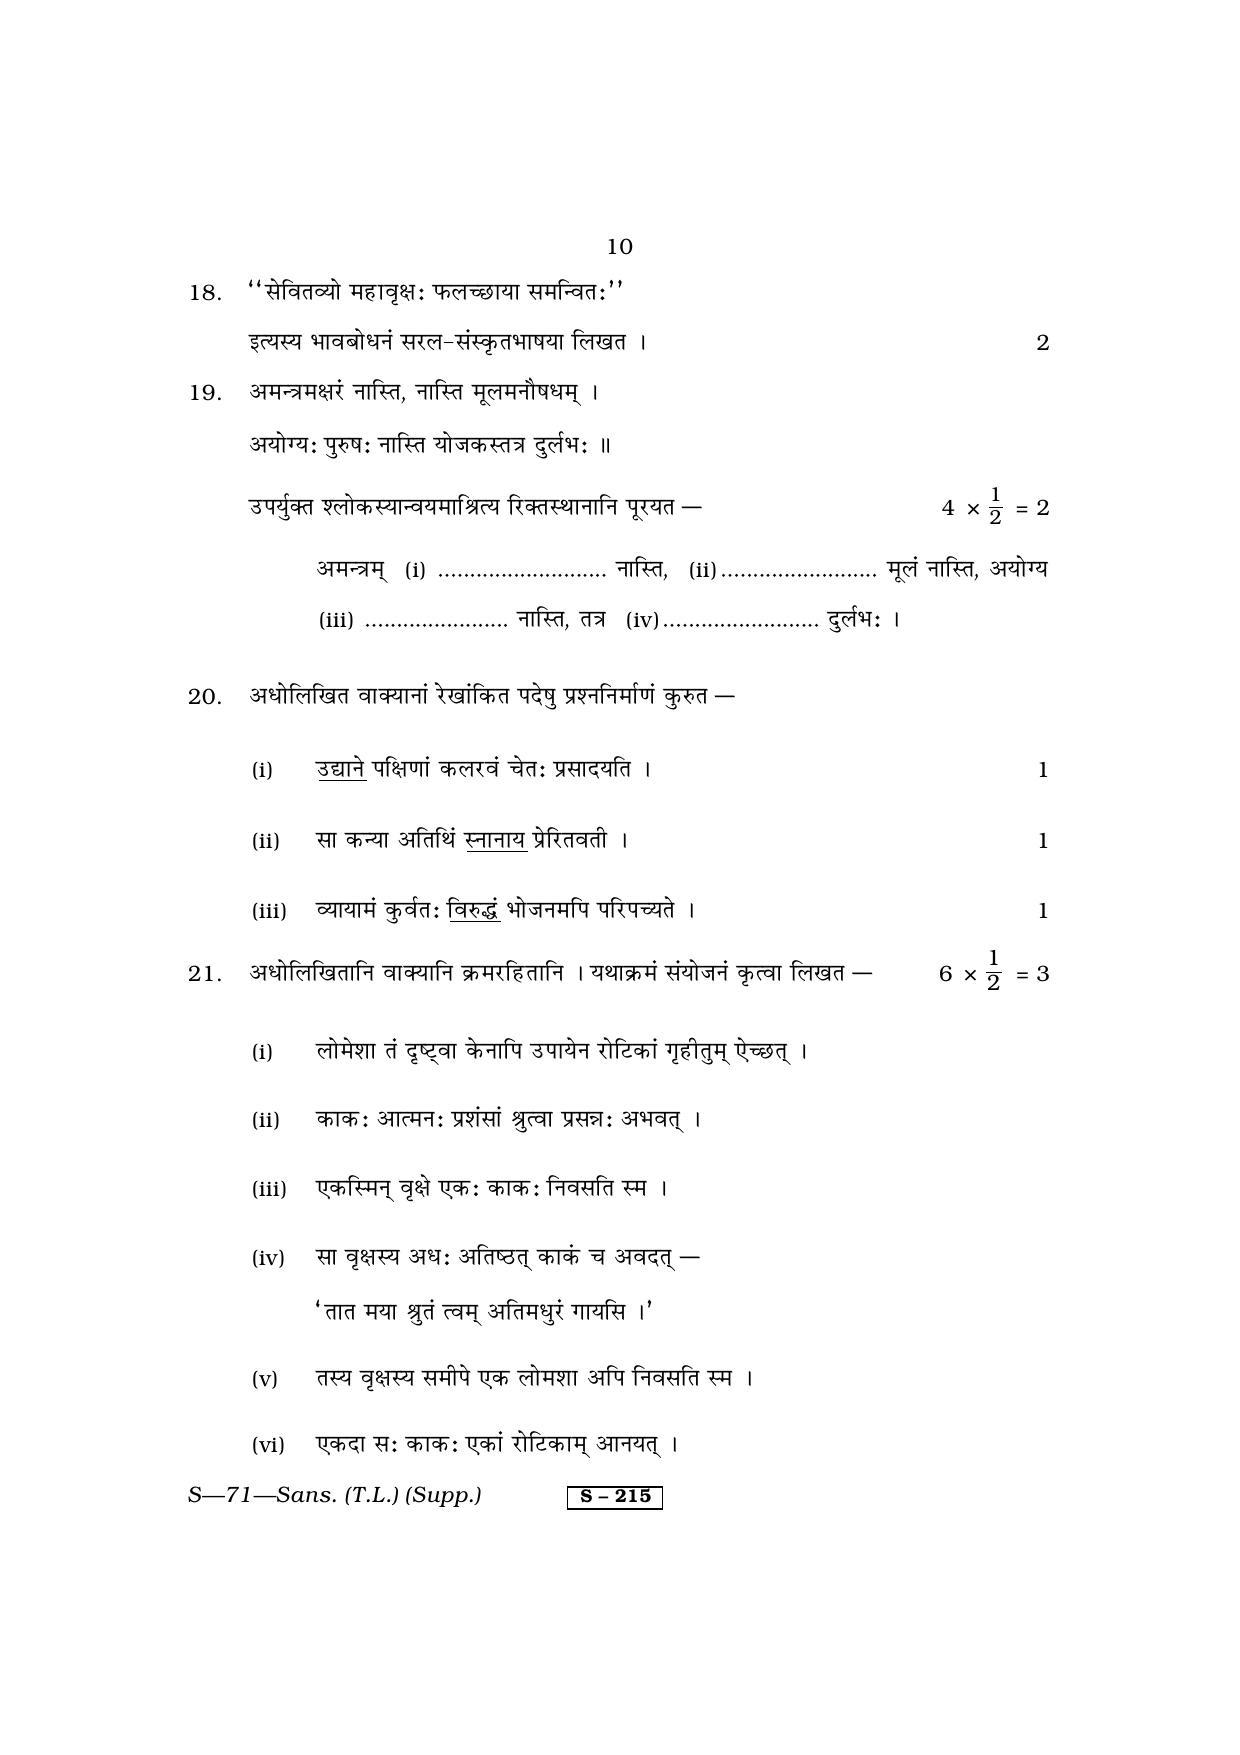 RBSE Class 10 Sanskrit (T.L.) Supplementary 2013 Question Paper - Page 10